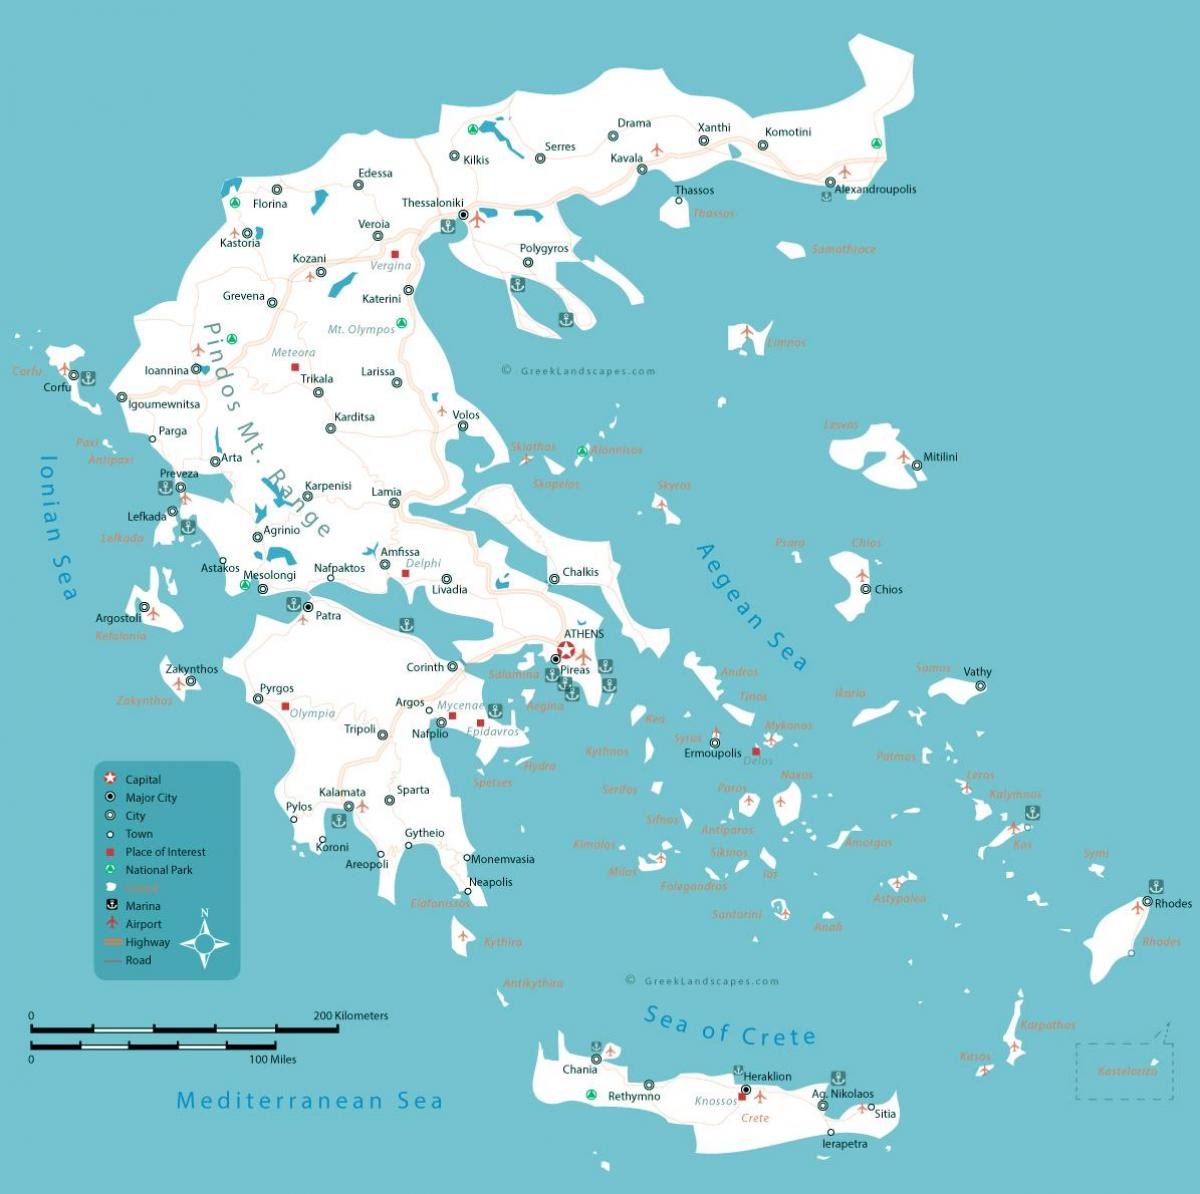 Map of Greece with main cities